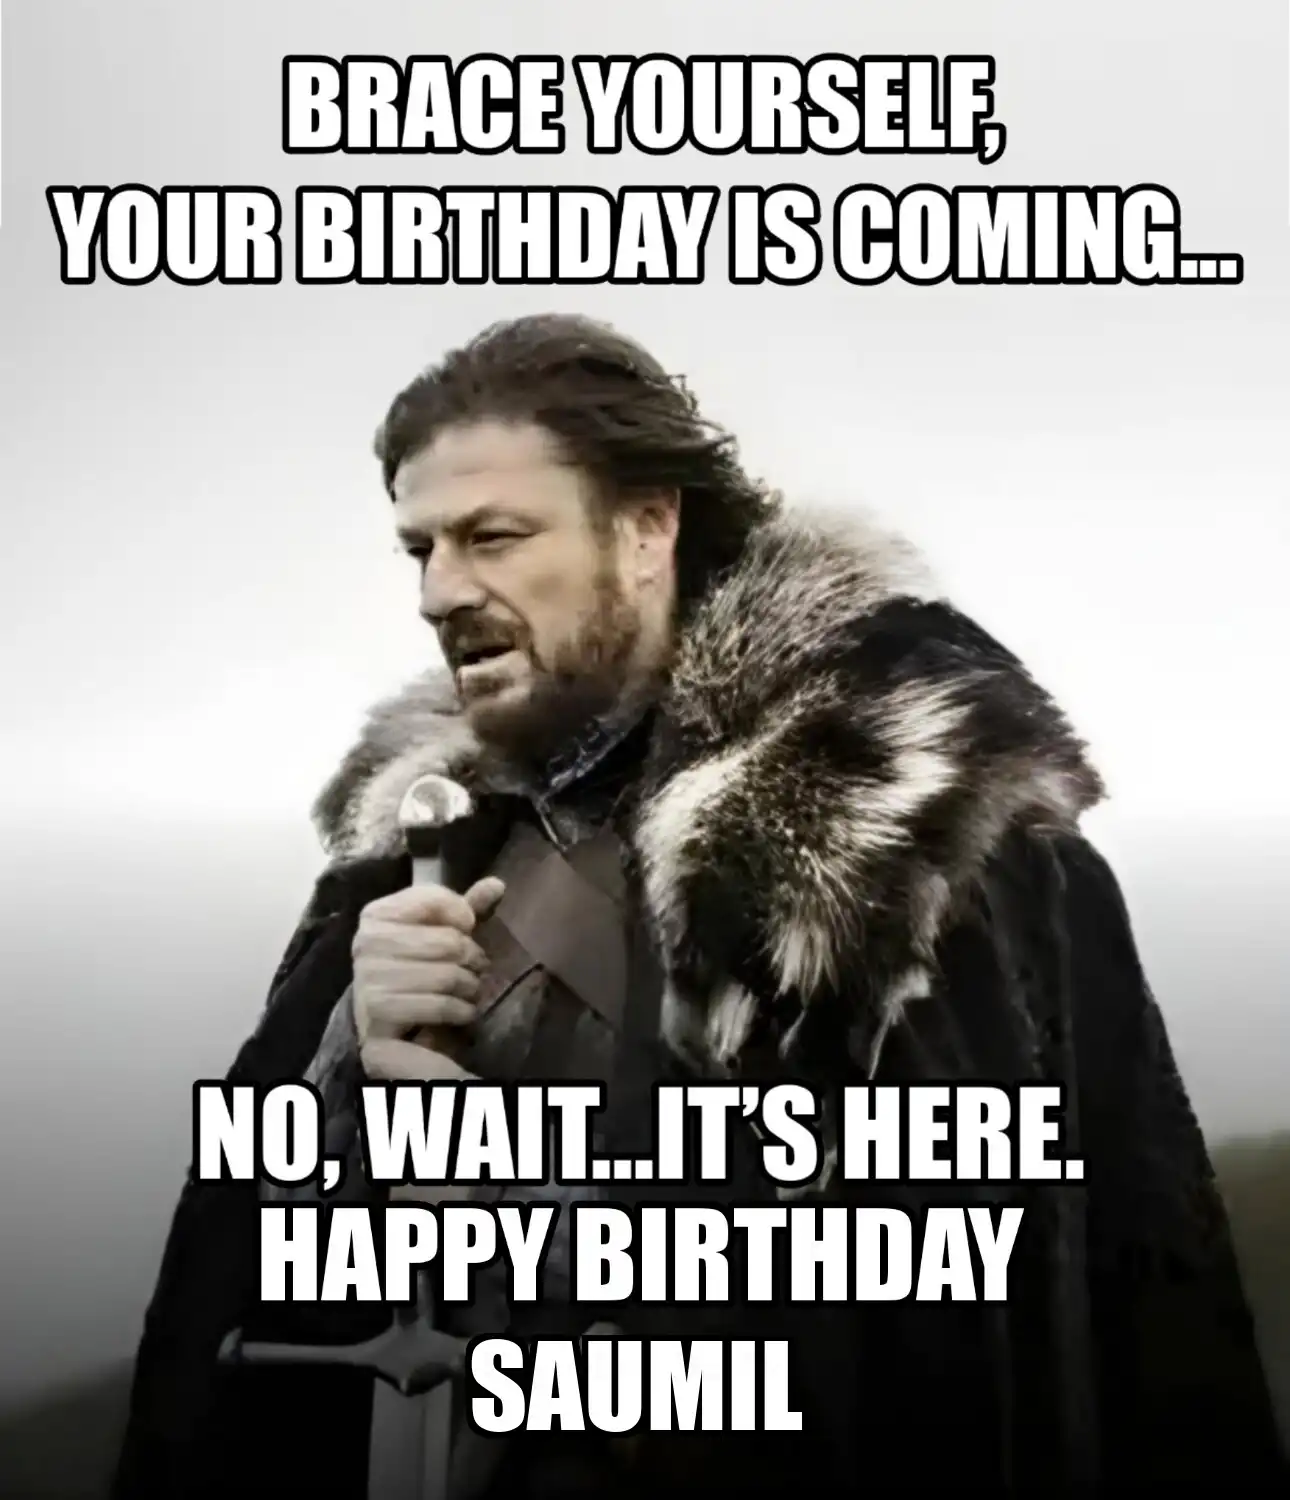 Happy Birthday Saumil Brace Yourself Your Birthday Is Coming Meme